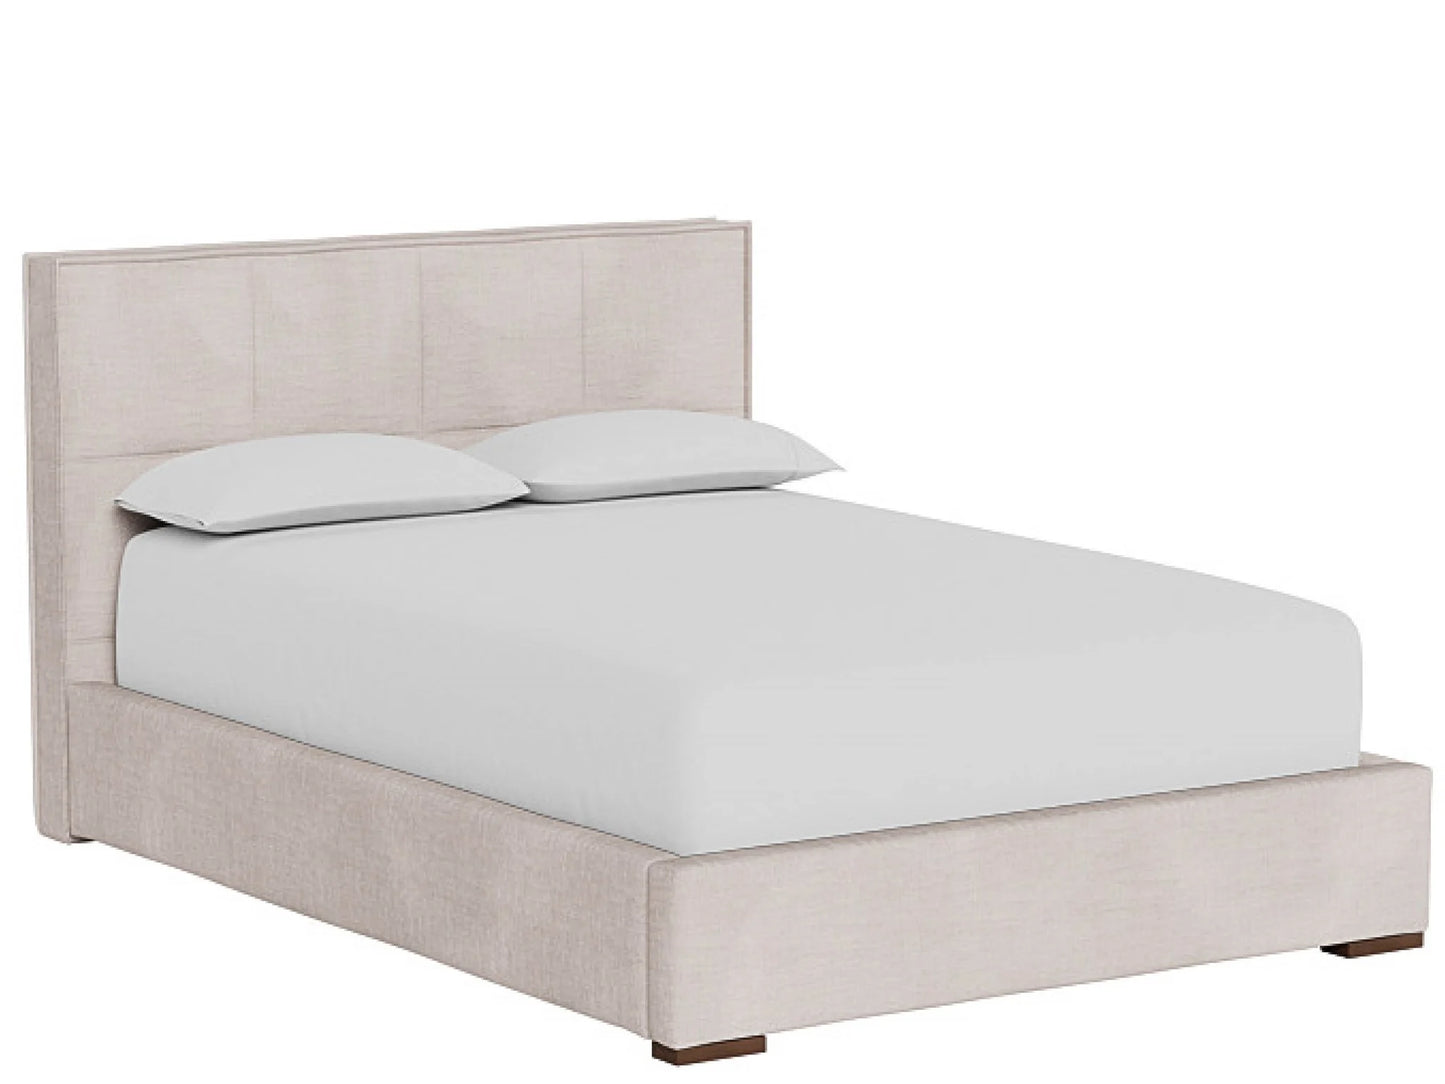 UNIVERSAL - MODERN CONNERY BED - SPECIAL ORDER